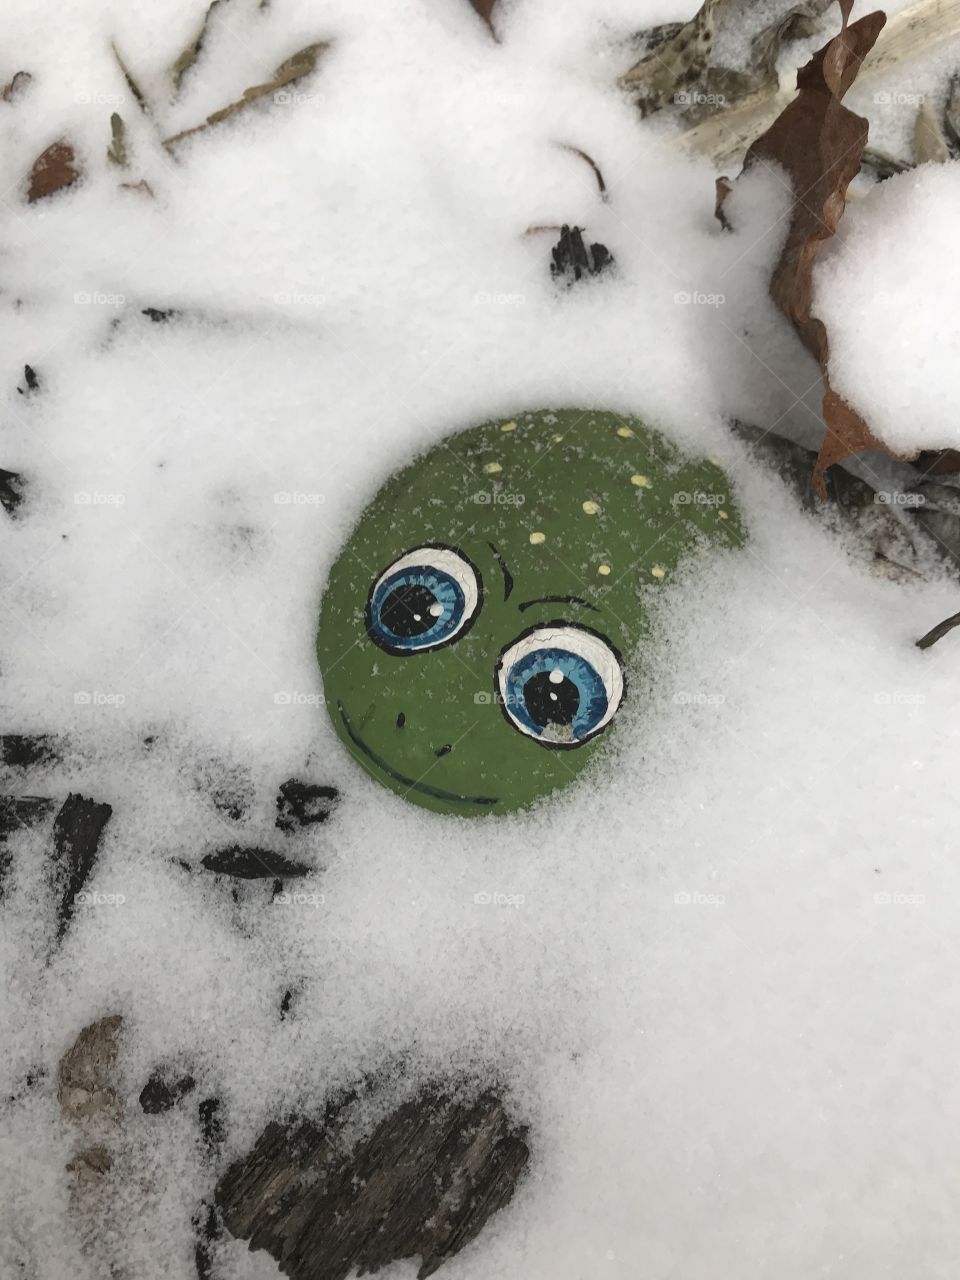 Froggy peeping out of the snow